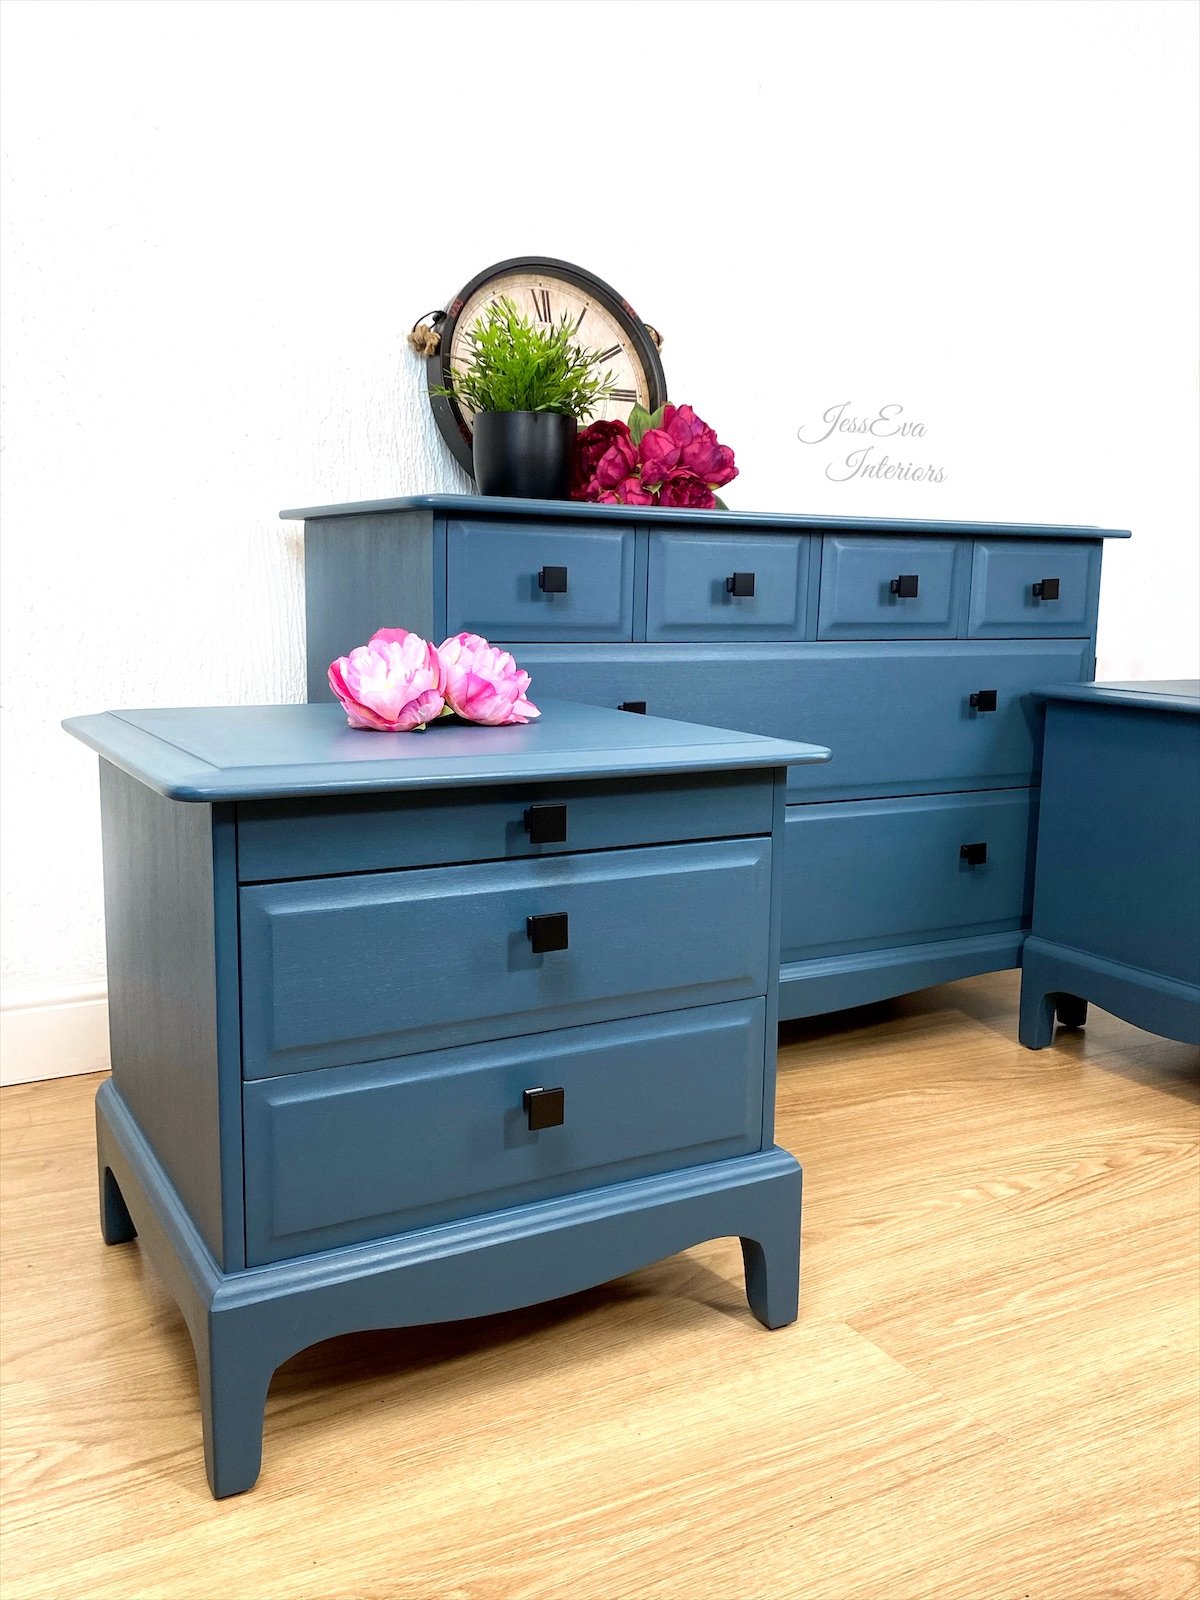 Stag Minstrel Bedroom Furniture Set Chest of Drawers and Bedside Cabinets Painted in Blue